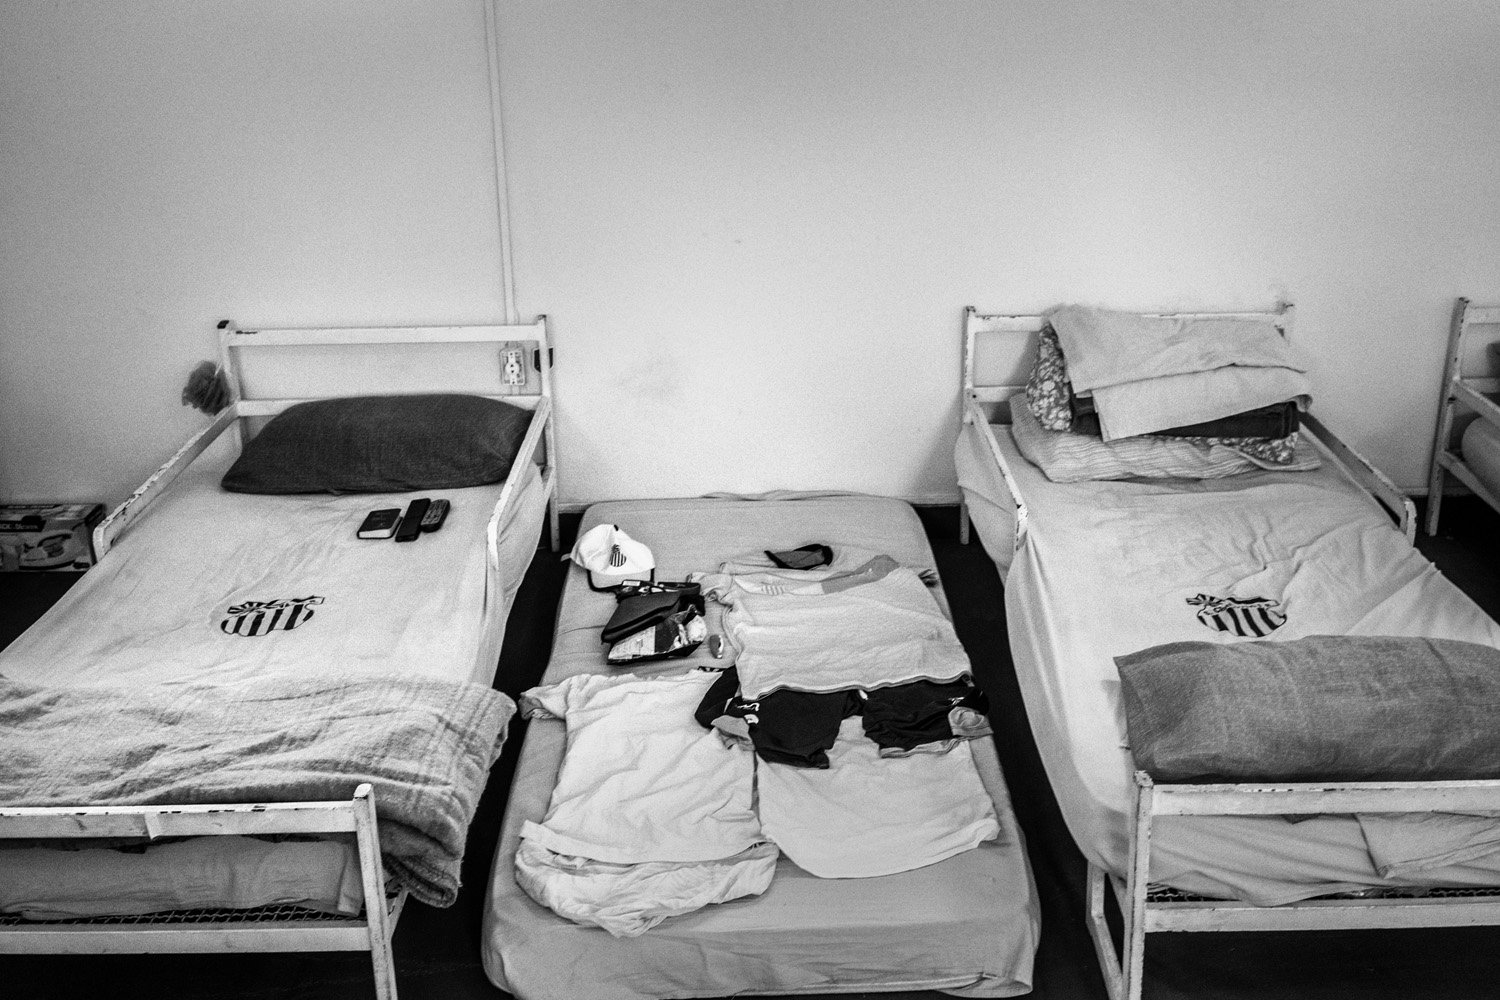 RIO DE JANEIRO, BRAZIL - MAY 2014: Commundal rooms where the Sao Cristovao Soccer players sleep and live after training. The Sao Cristovao Soccer Team is the older socer team in Brazil which was the team of the world famous player Ronaldo when he was a kid. Today it´s an important school for young talents who wants to be success professional players in Europe. (Photo by Sebastián Liste/ Reportage by Getty Images)